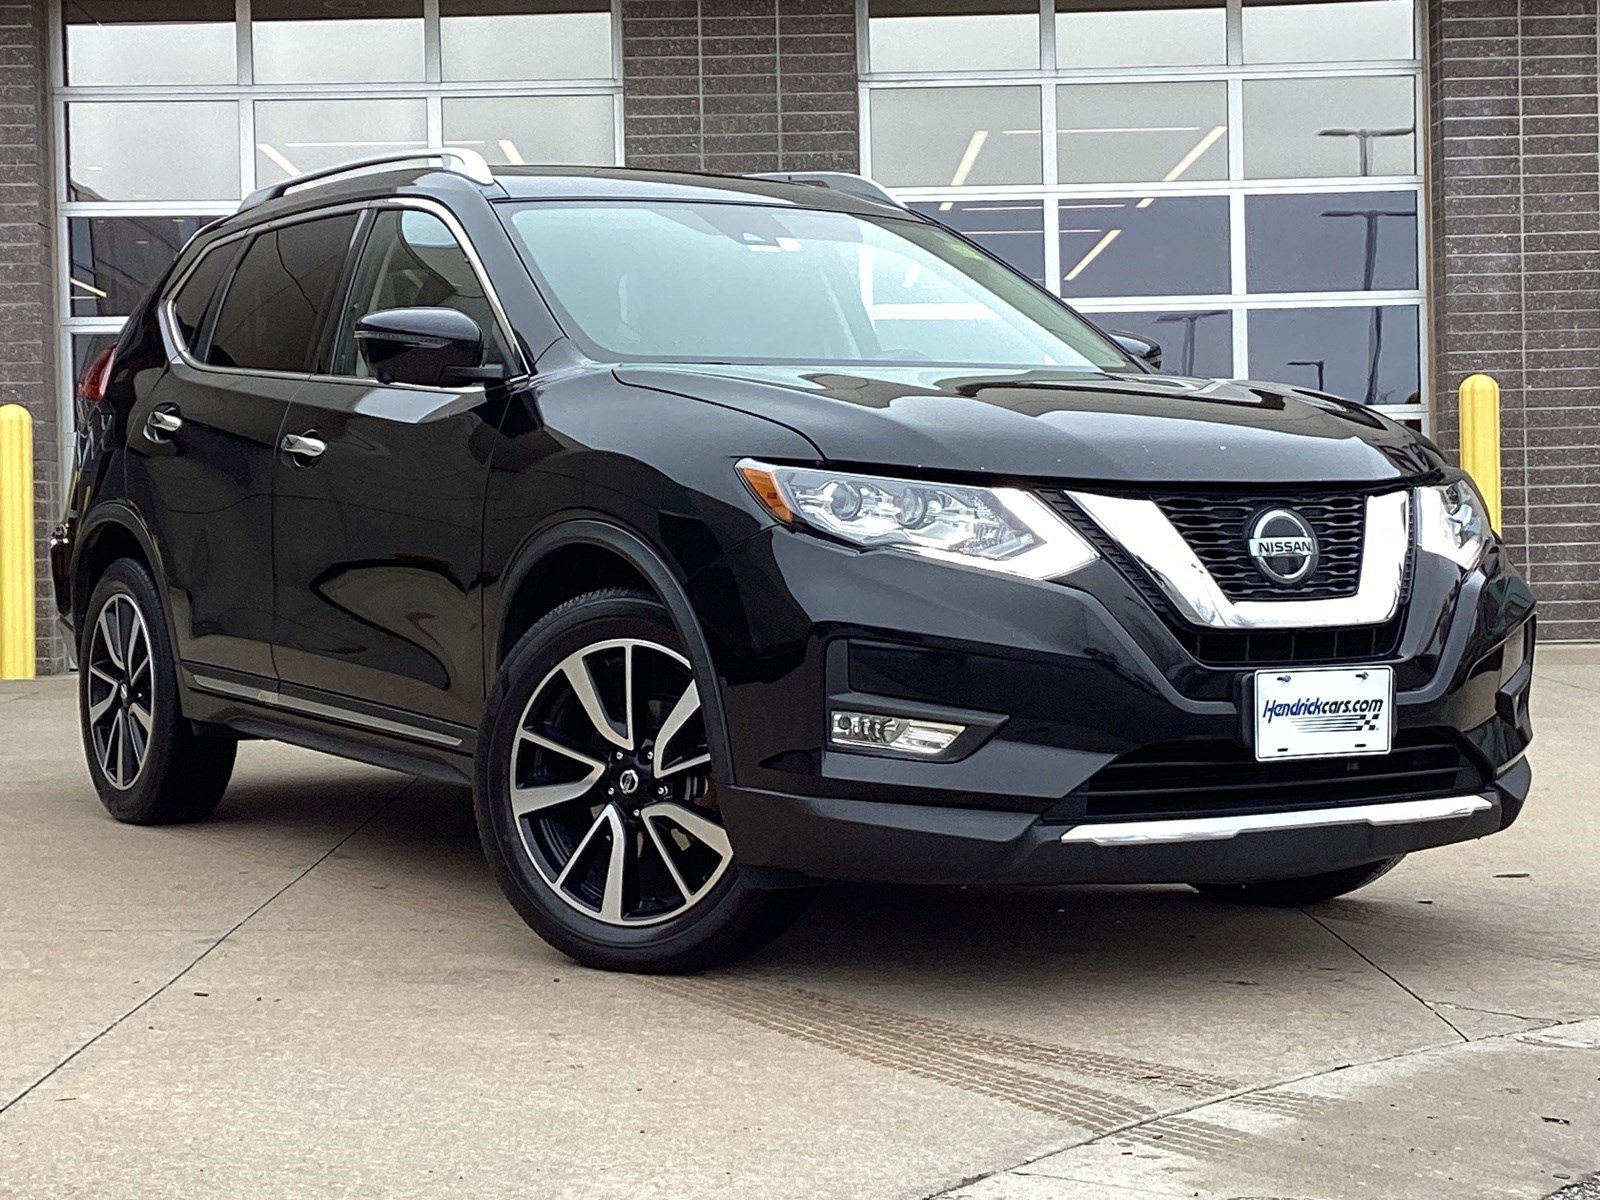 Pre-Owned 2018 Nissan Rogue SL SUV in Cary #PS42299 | Hendrick Dodge Cary